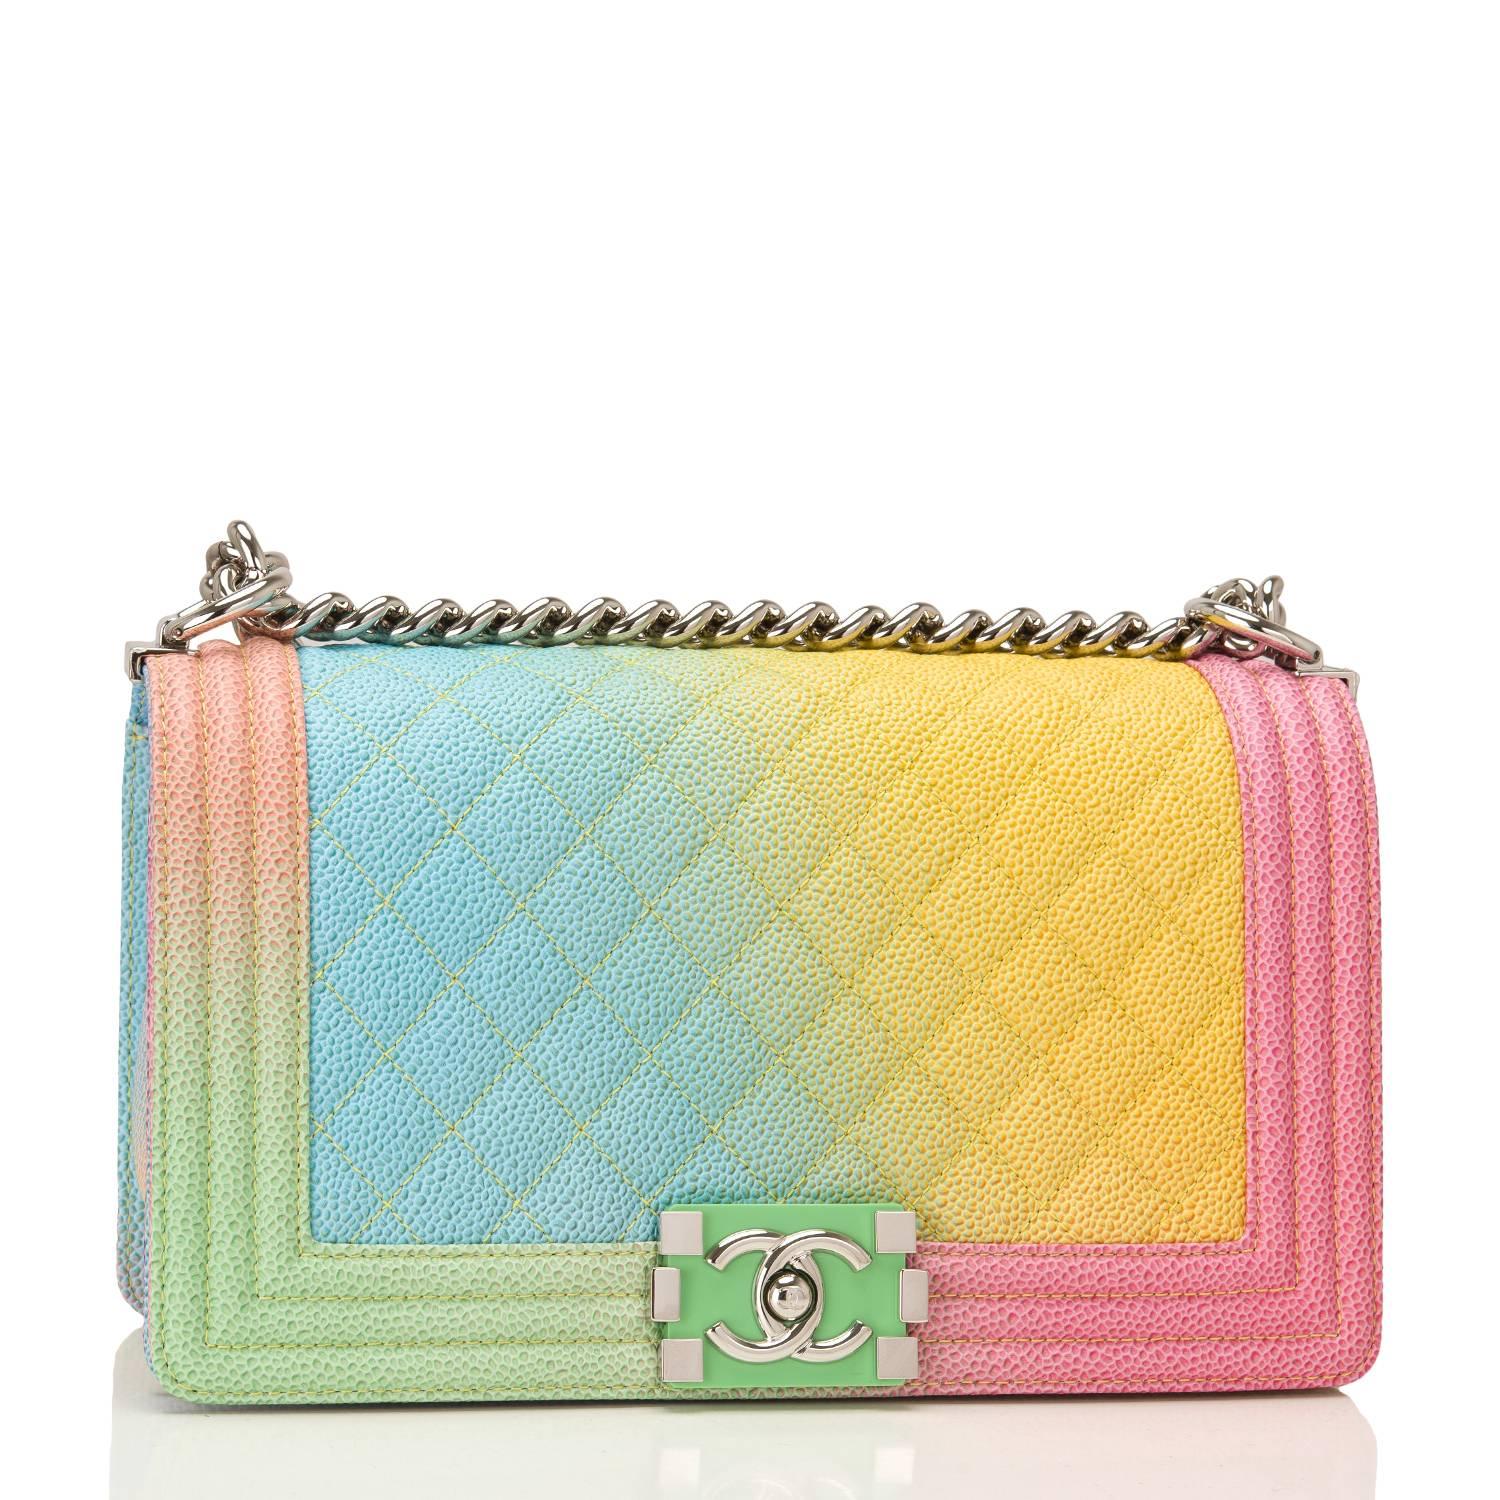 Chanel Old Medium Boy bag of rainbow printed caviar leather with silver tone hardware.

This limited edition bag from the Cuba collection features a full front flap with the Le Boy CC push lock closure of green resin and silver tone hardware and a